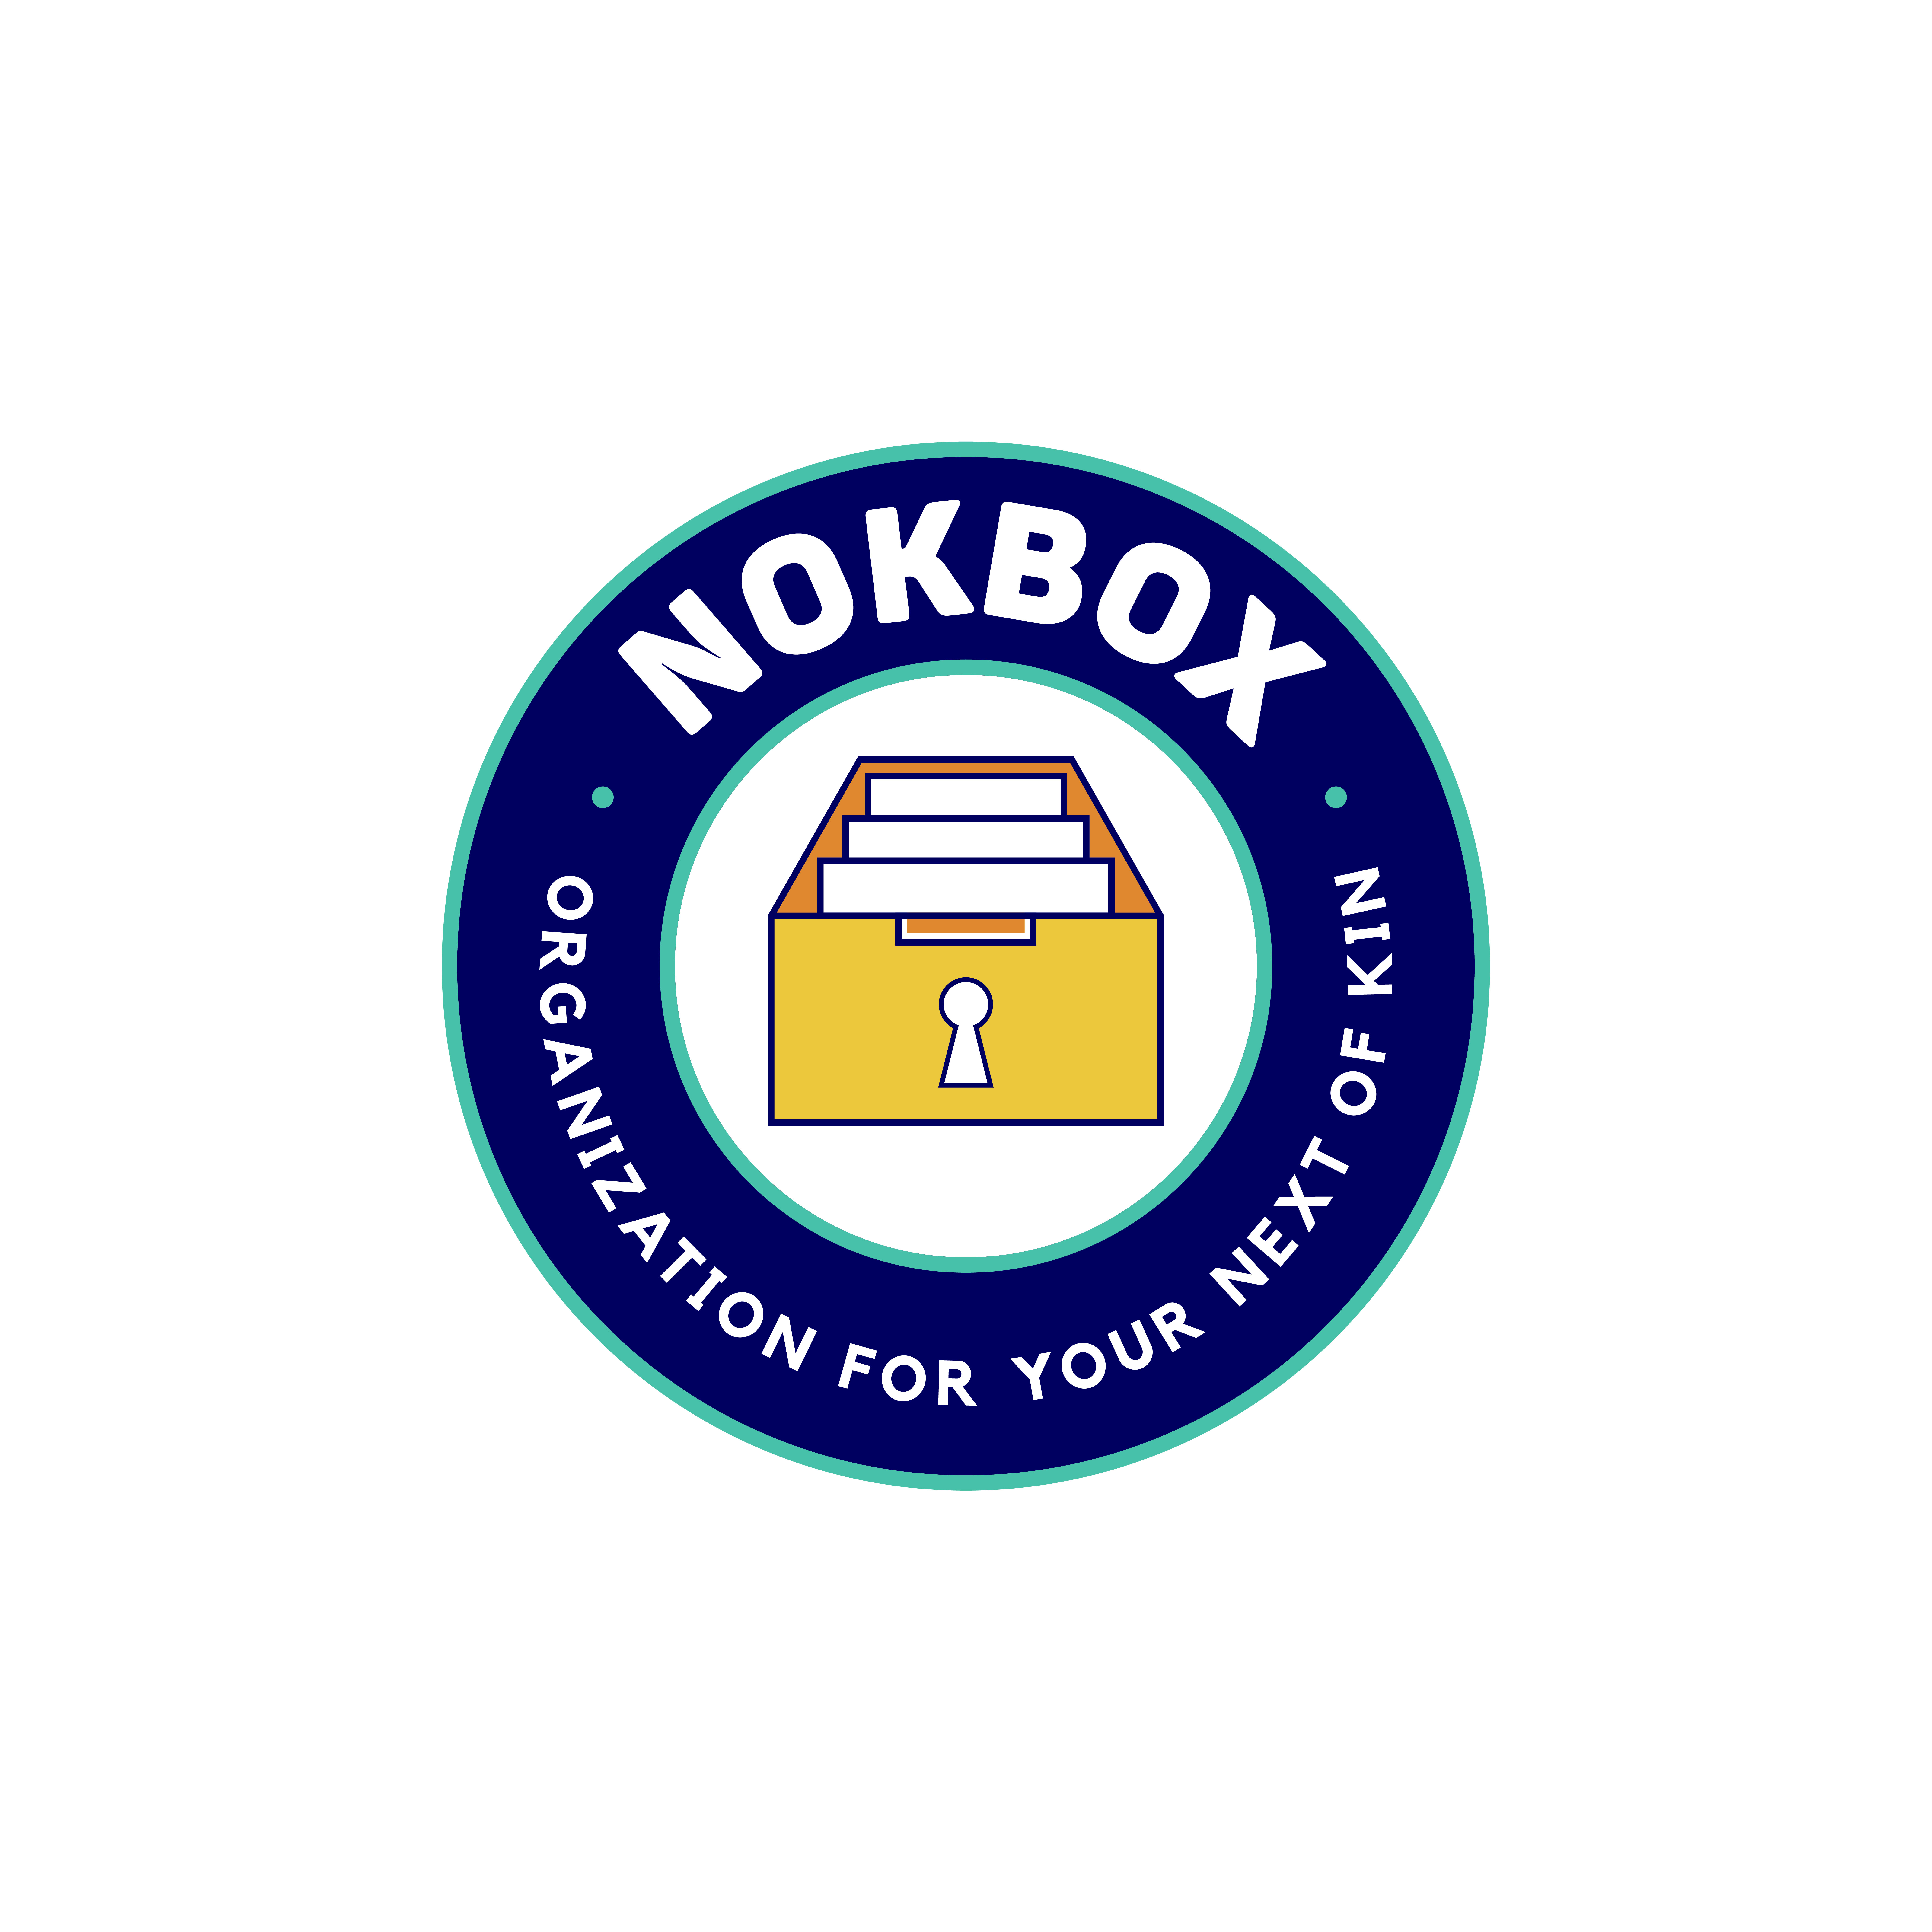 The Nokbox Coupons and Promo Code